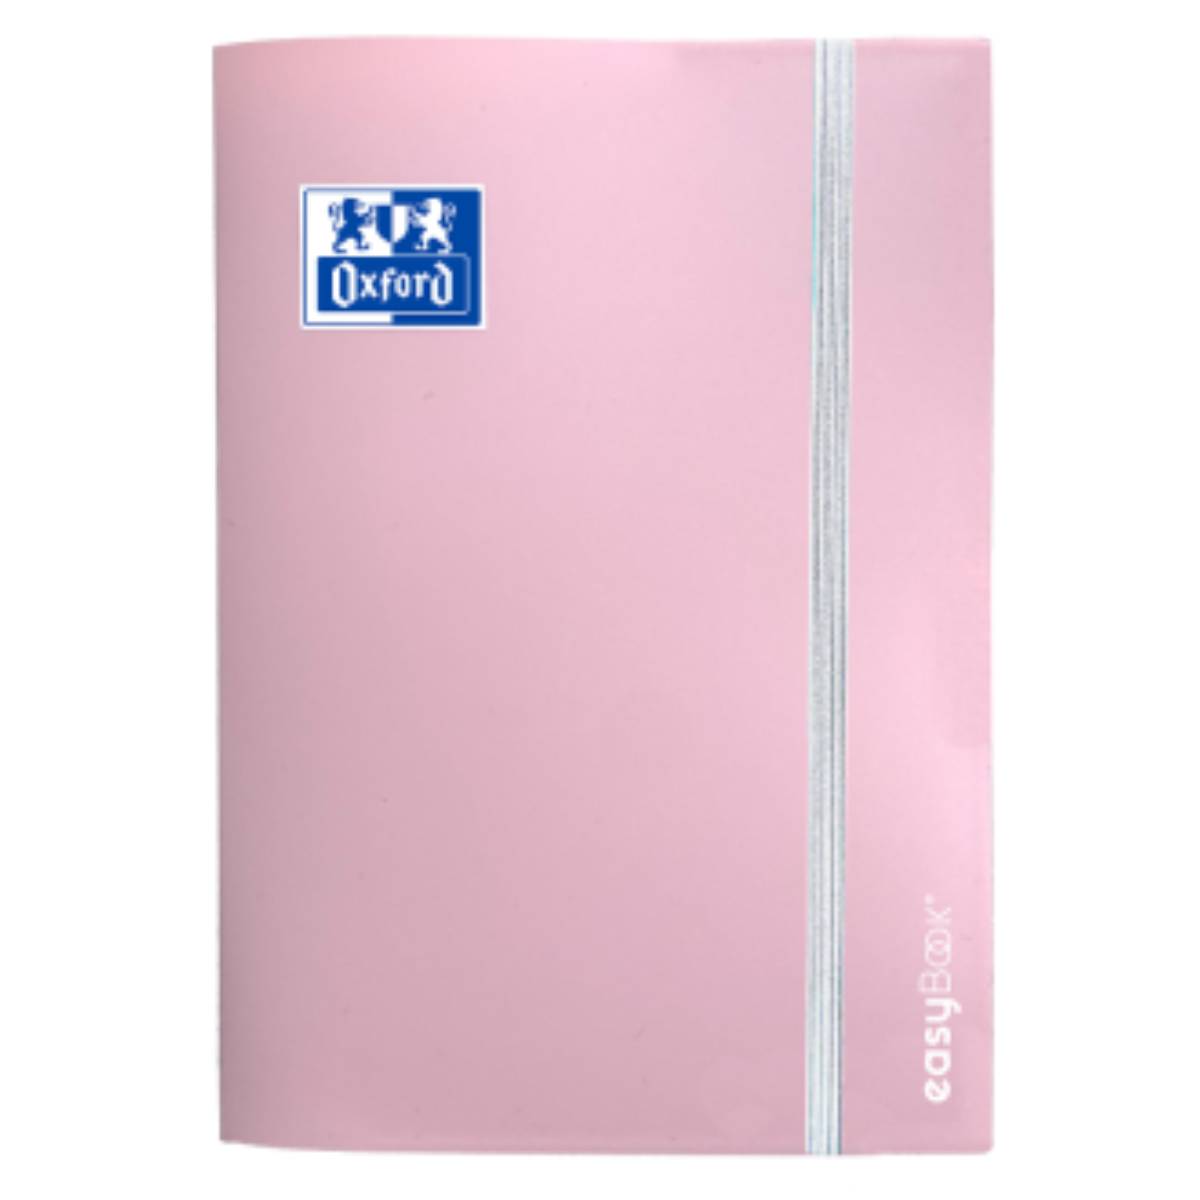 Agenda oxford easybook pastel 12x18 352 pages 1 jour/page 24-25